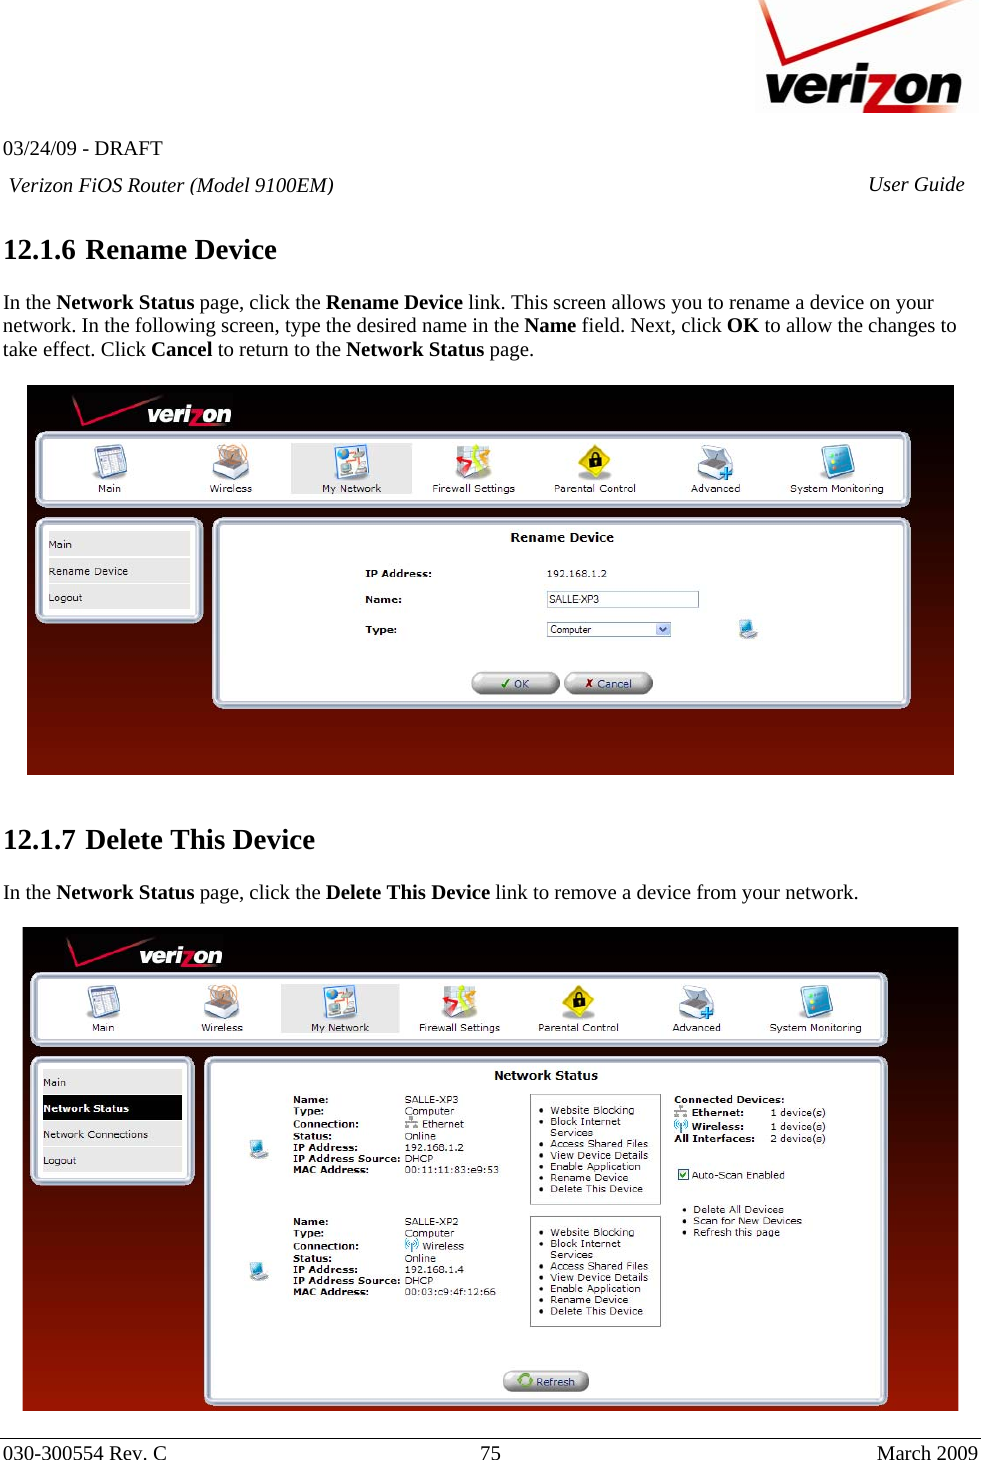   03/24/09 - DRAFT   030-300554 Rev. C  75      March 2009  Verizon FiOS Router (Model 9100EM) User Guide 12.1.6  Rename Device  In the Network Status page, click the Rename Device link. This screen allows you to rename a device on your network. In the following screen, type the desired name in the Name field. Next, click OK to allow the changes to take effect. Click Cancel to return to the Network Status page.     12.1.7  Delete This Device  In the Network Status page, click the Delete This Device link to remove a device from your network.    